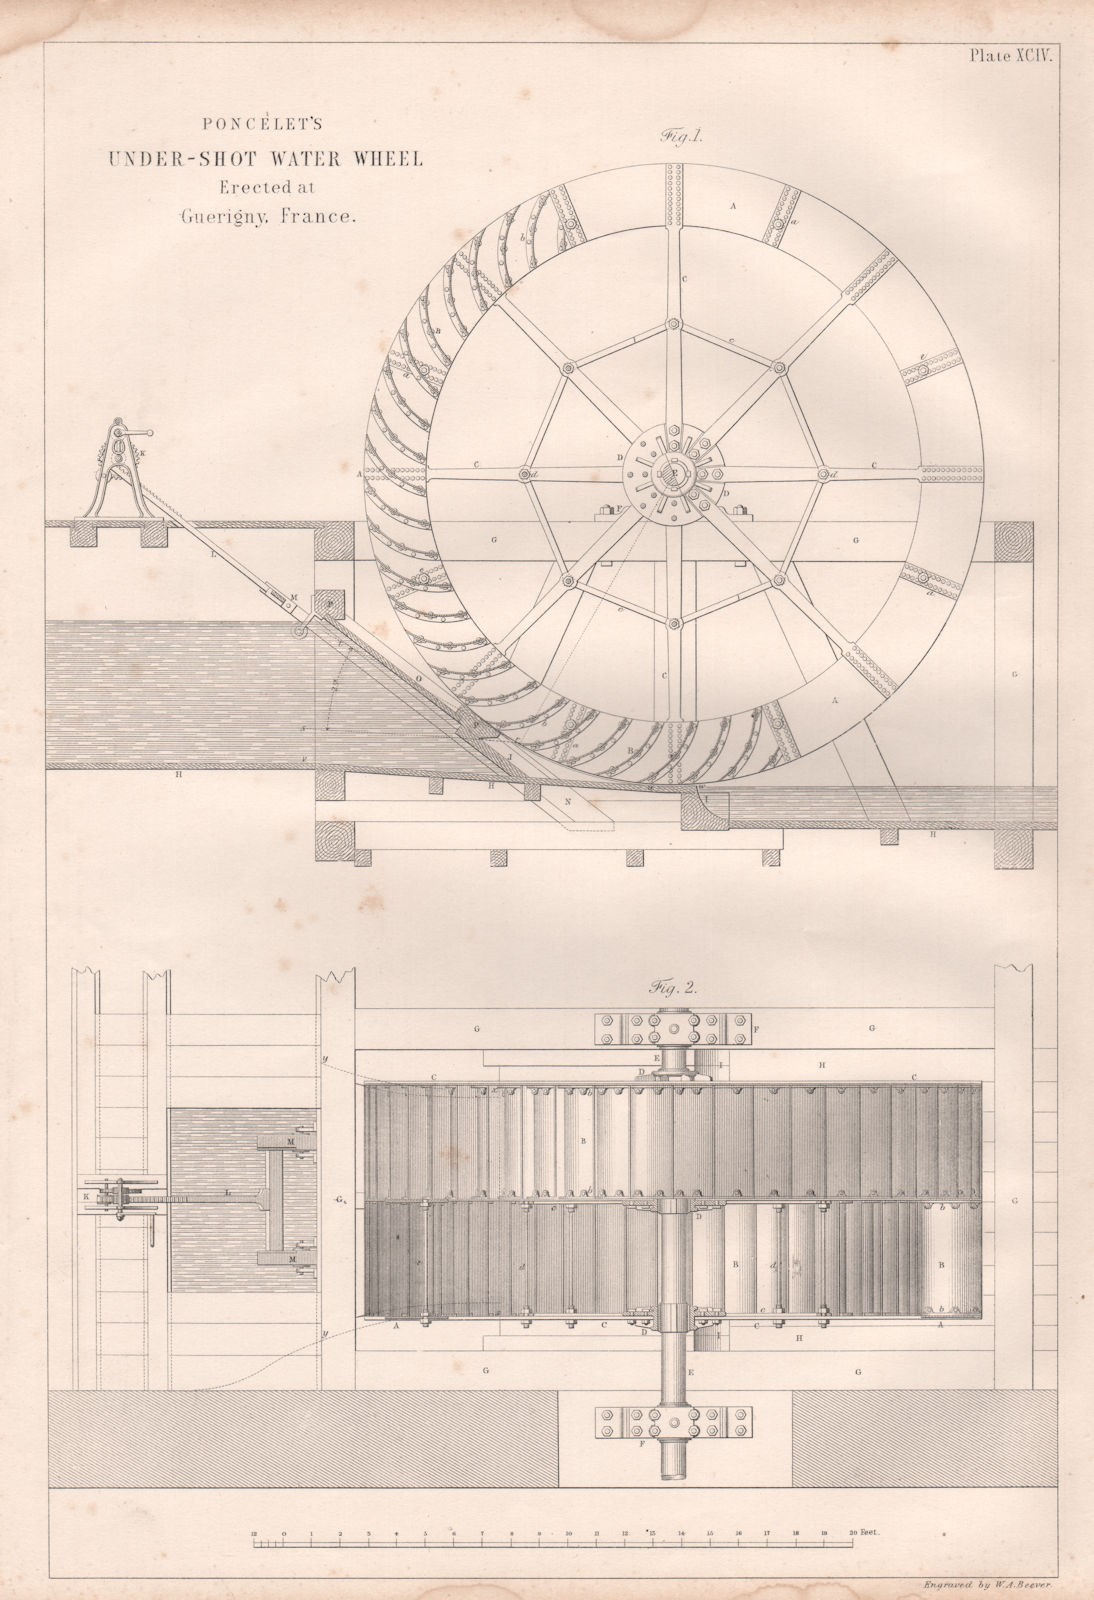 19C ENGINEERING DRAWING. Poncelet's under-shot water wheel. Guerigny France 1847